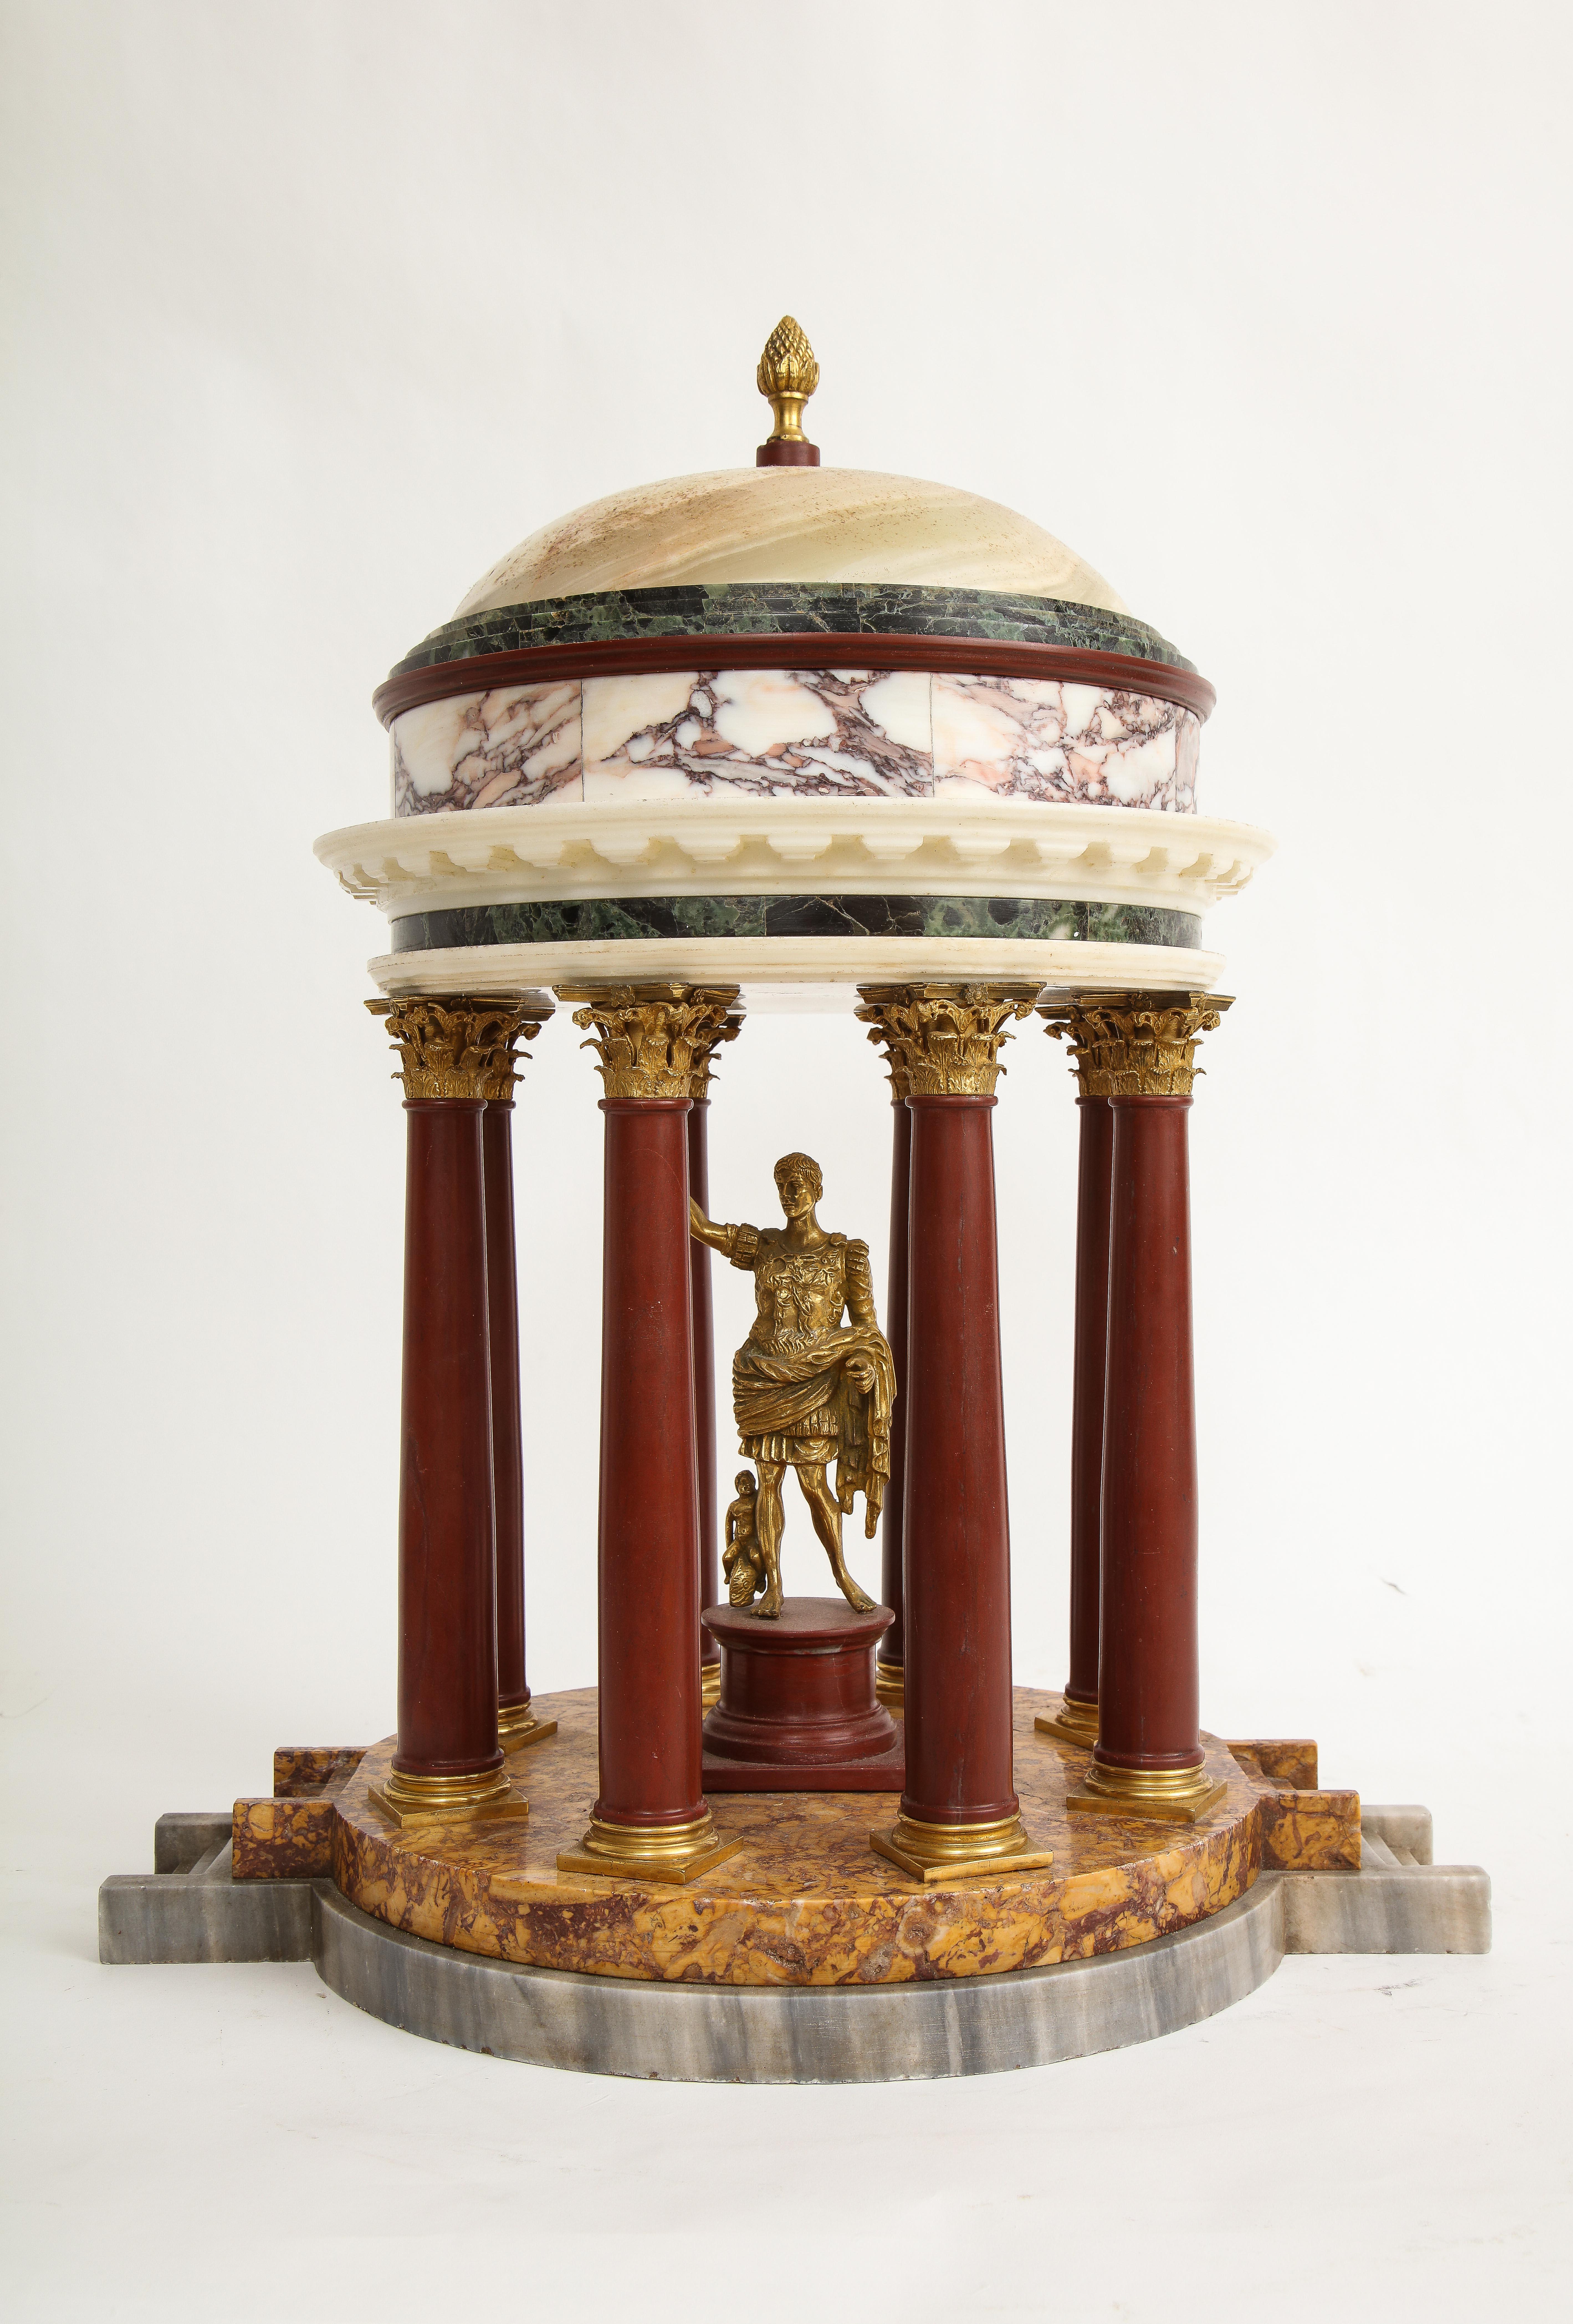 A 19th Century Italian Ormolu Mounted Multi-Marble Julius Caesar Coliseum Model. This is a beautiful rendition of a Roman coliseum with a dore bronze mounted Julius Caesar standing in the middle of the marble masterpiece. The domed top is made up of